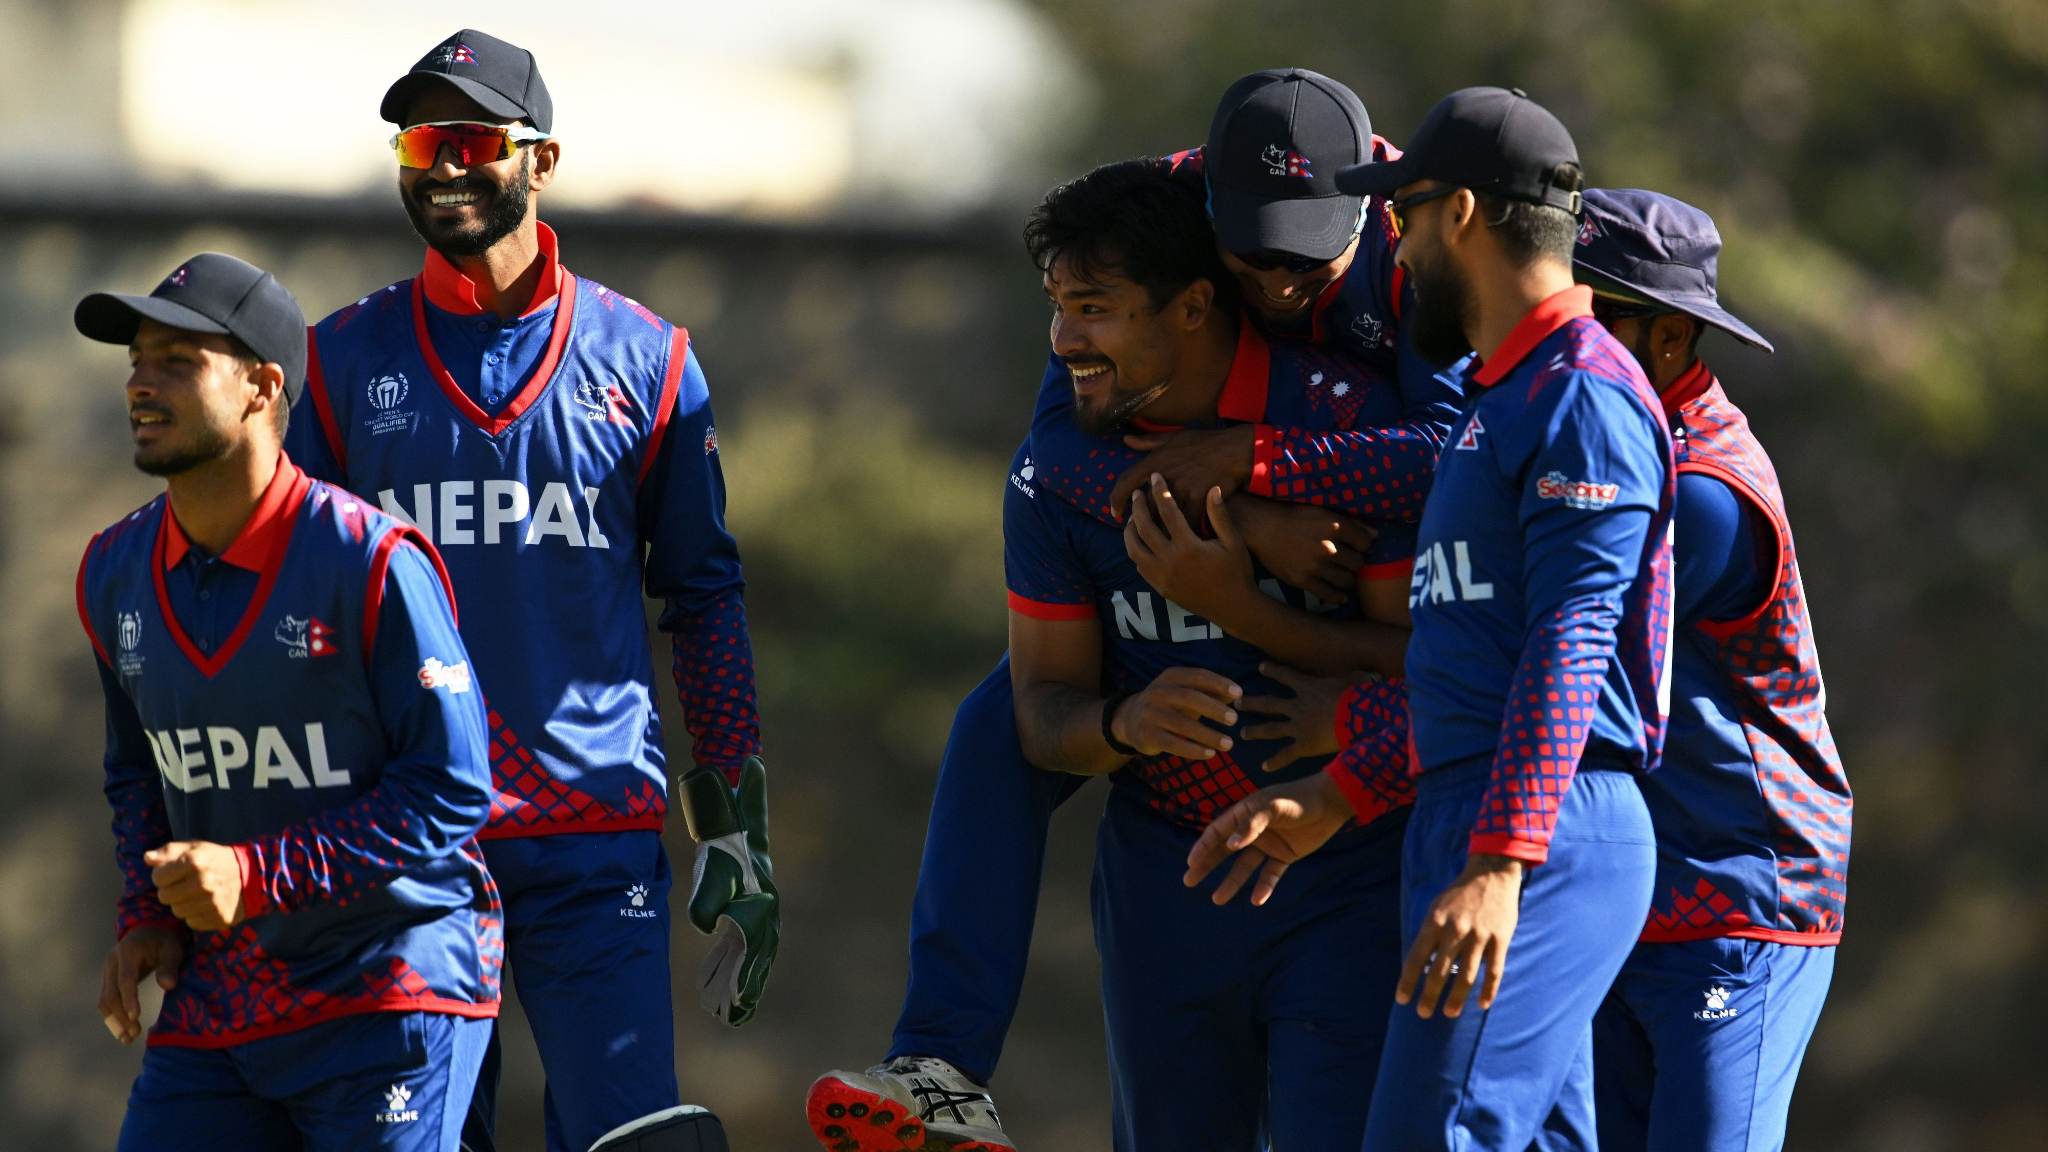 Nepal to take on UAE in the seventh-place playoff of the ICC Cricket World Cup Qualifier